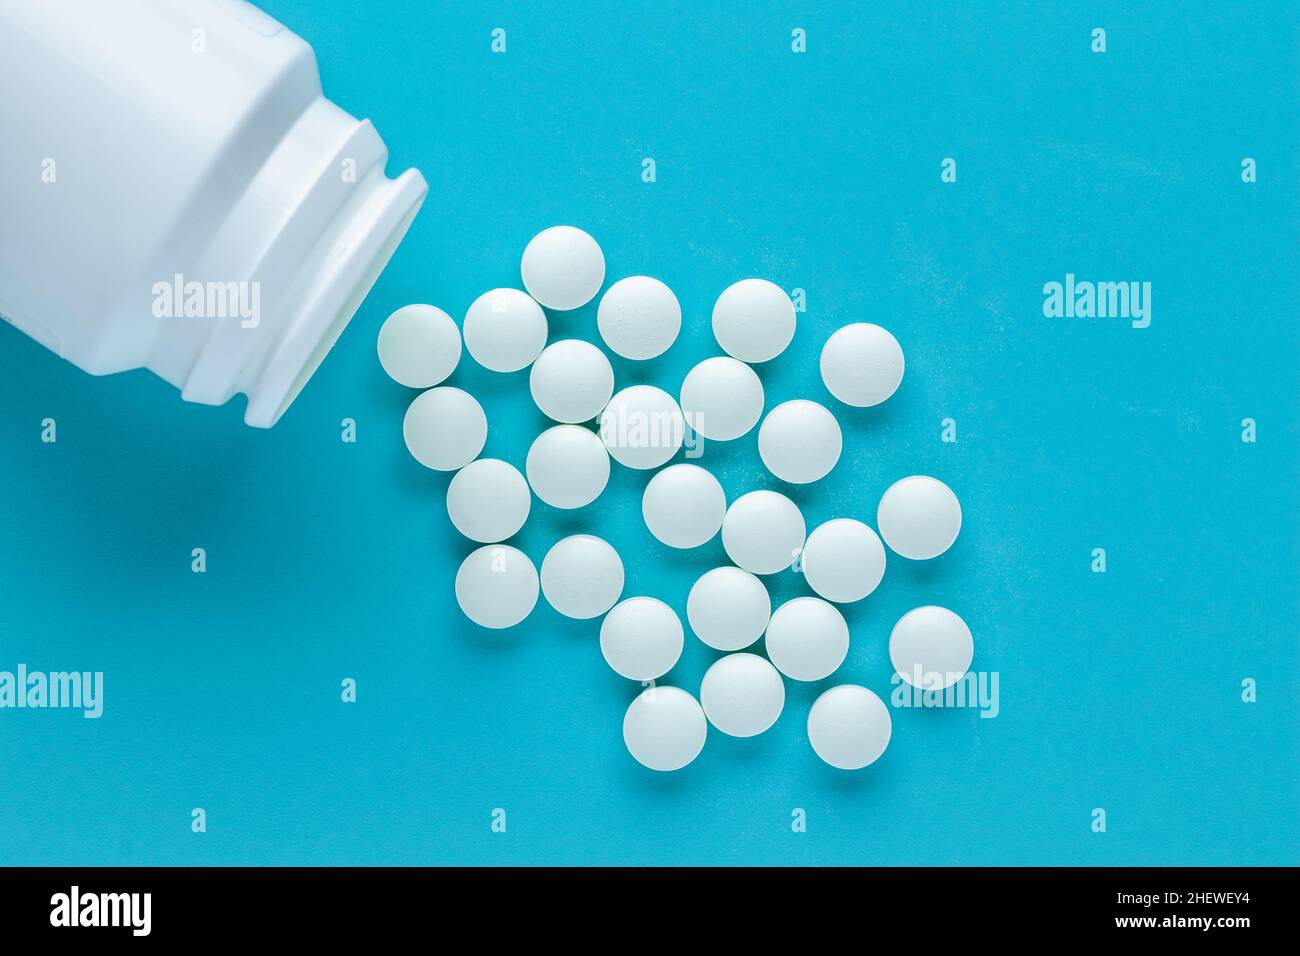 White pills on a blue background, a bunch of scattered round tablets. Medicaments in bottle close-up. Overdose concept, disease treatment Stock Photo